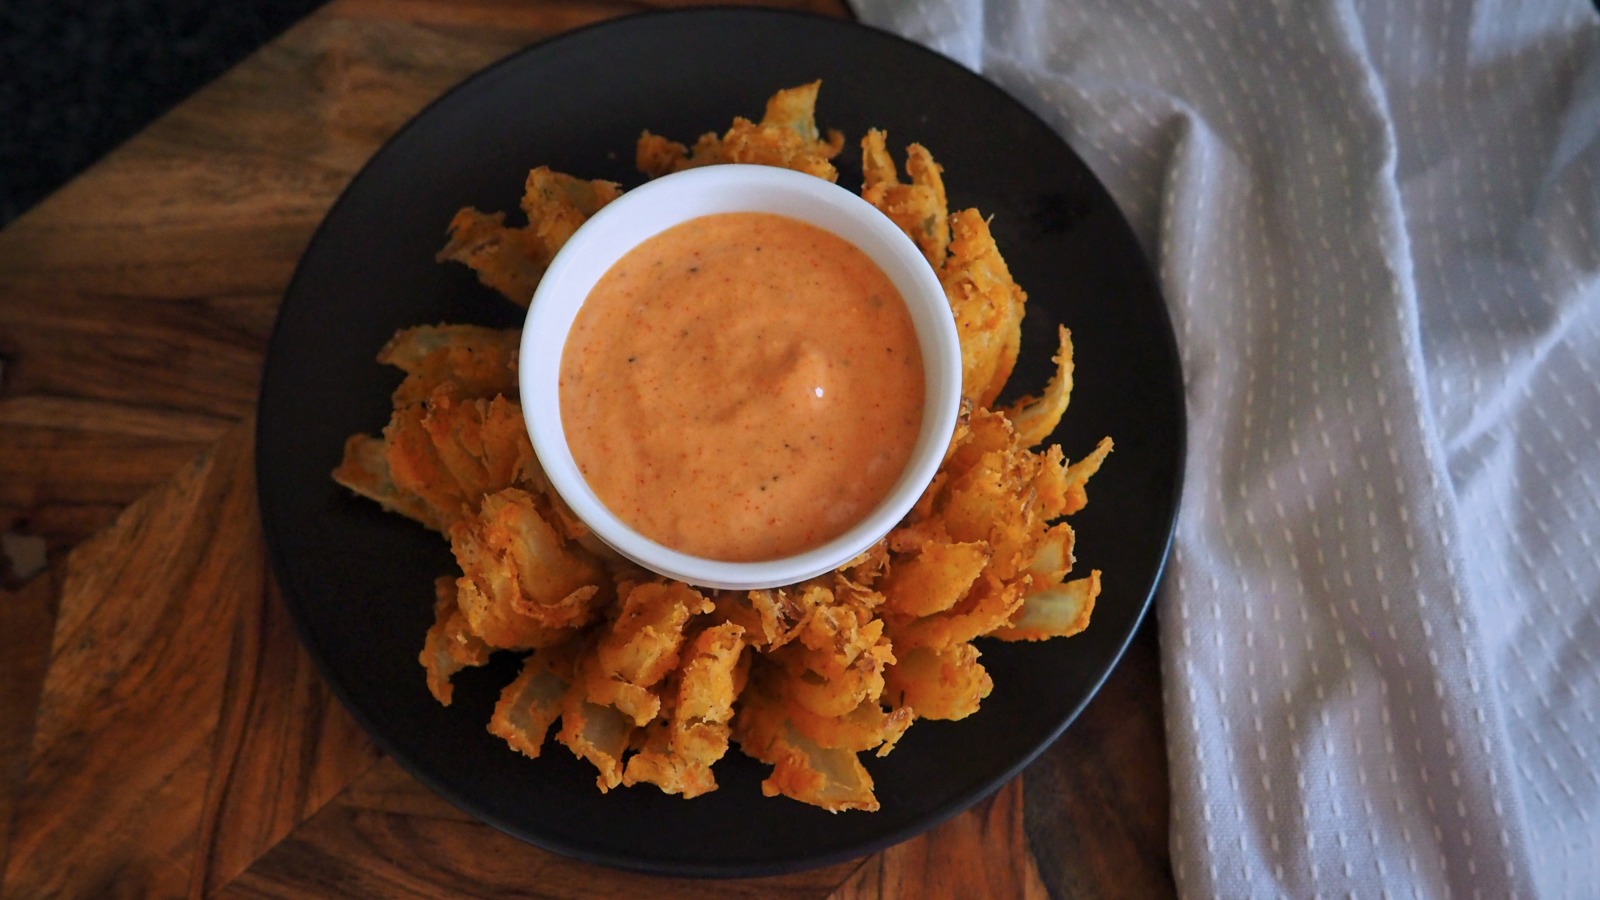 Outback's Blooming Onion and Dipping Sauce